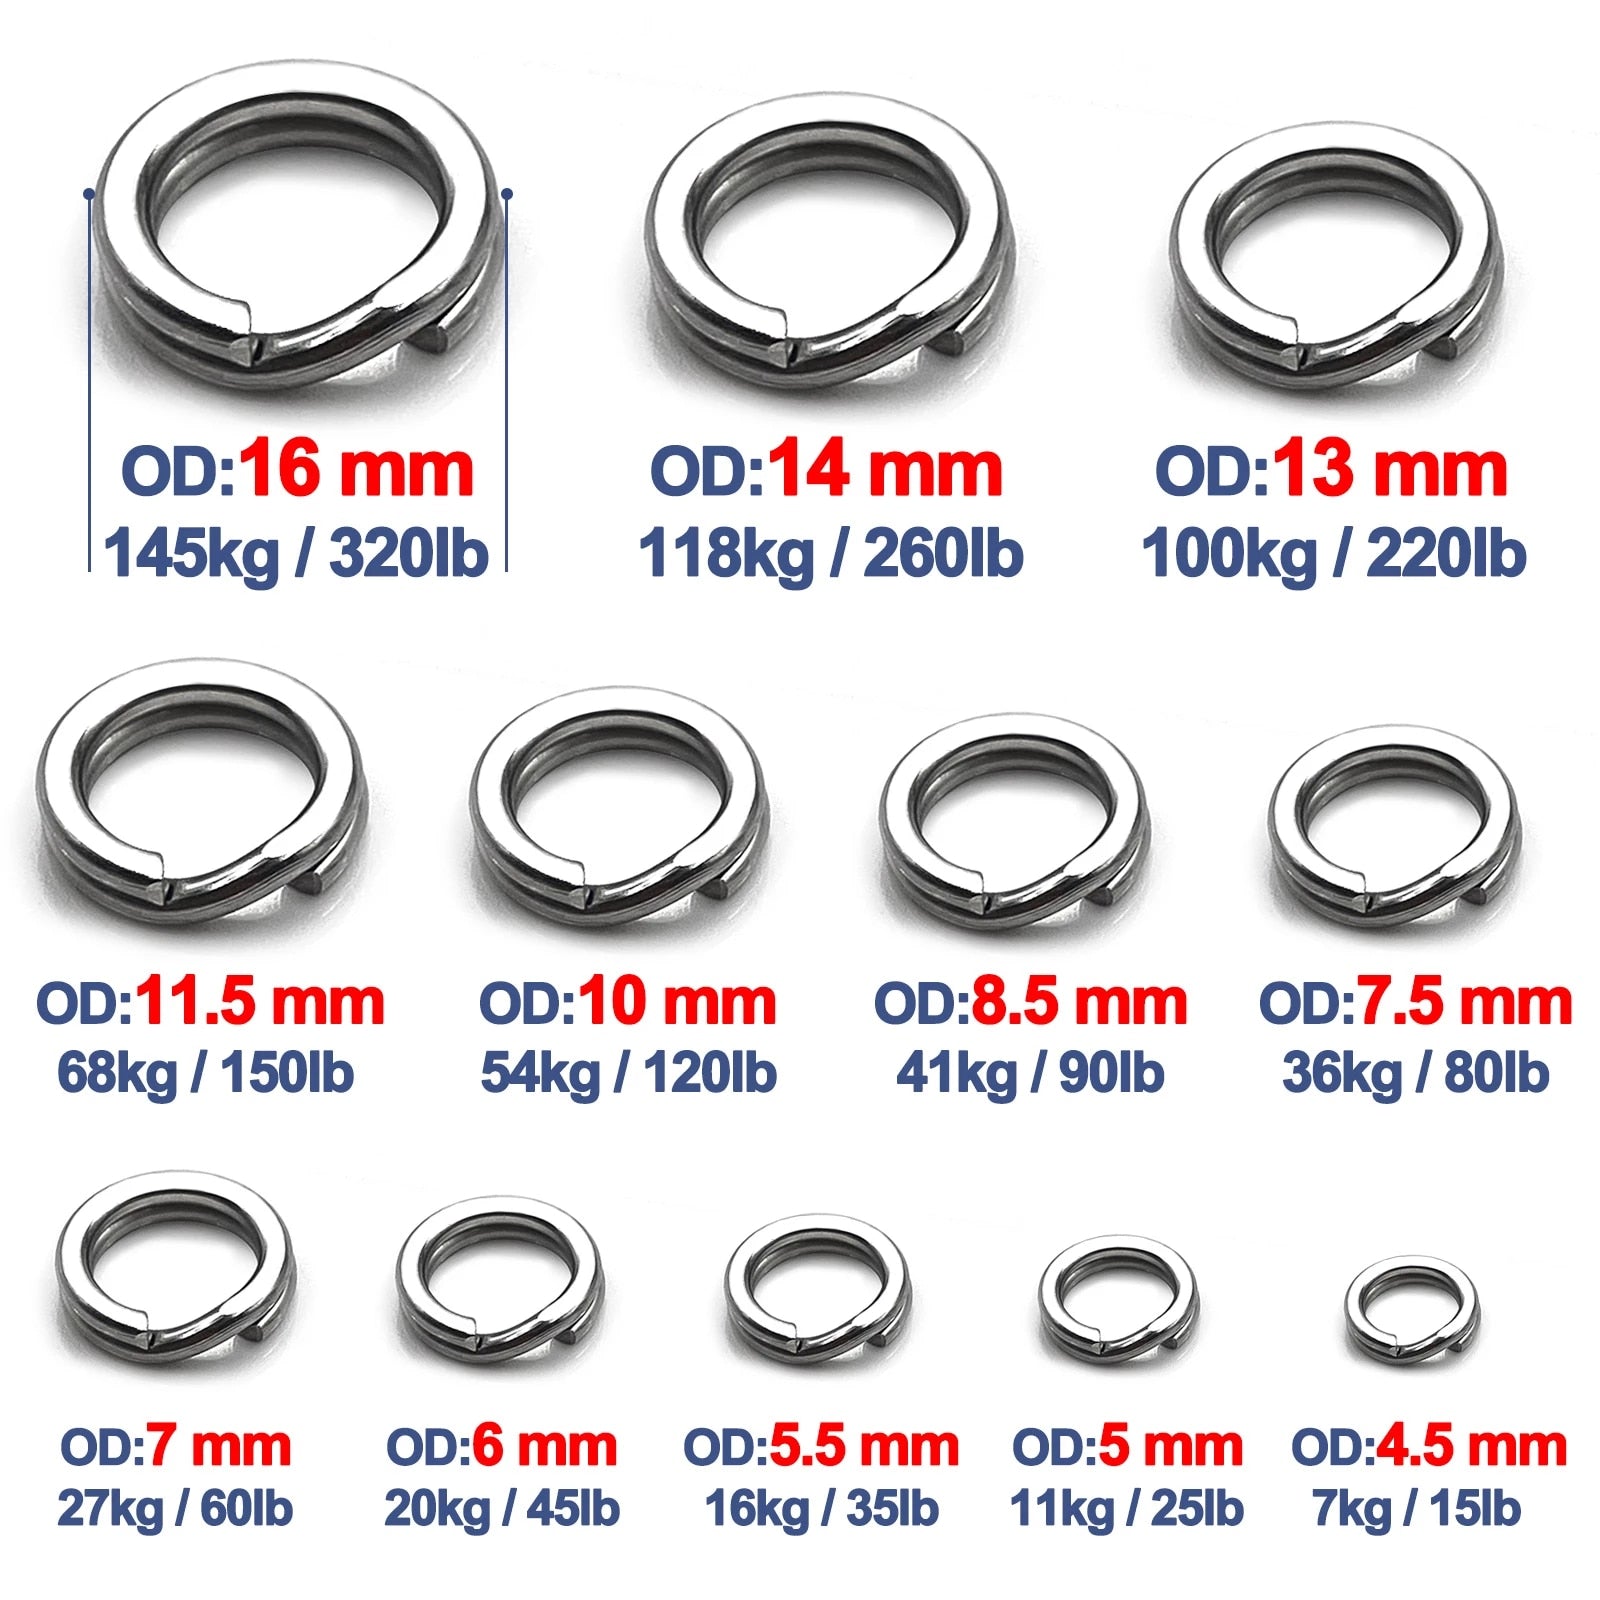 Fishing Lures Split Rings 50~200Pcs Fishing Accessories Stainless